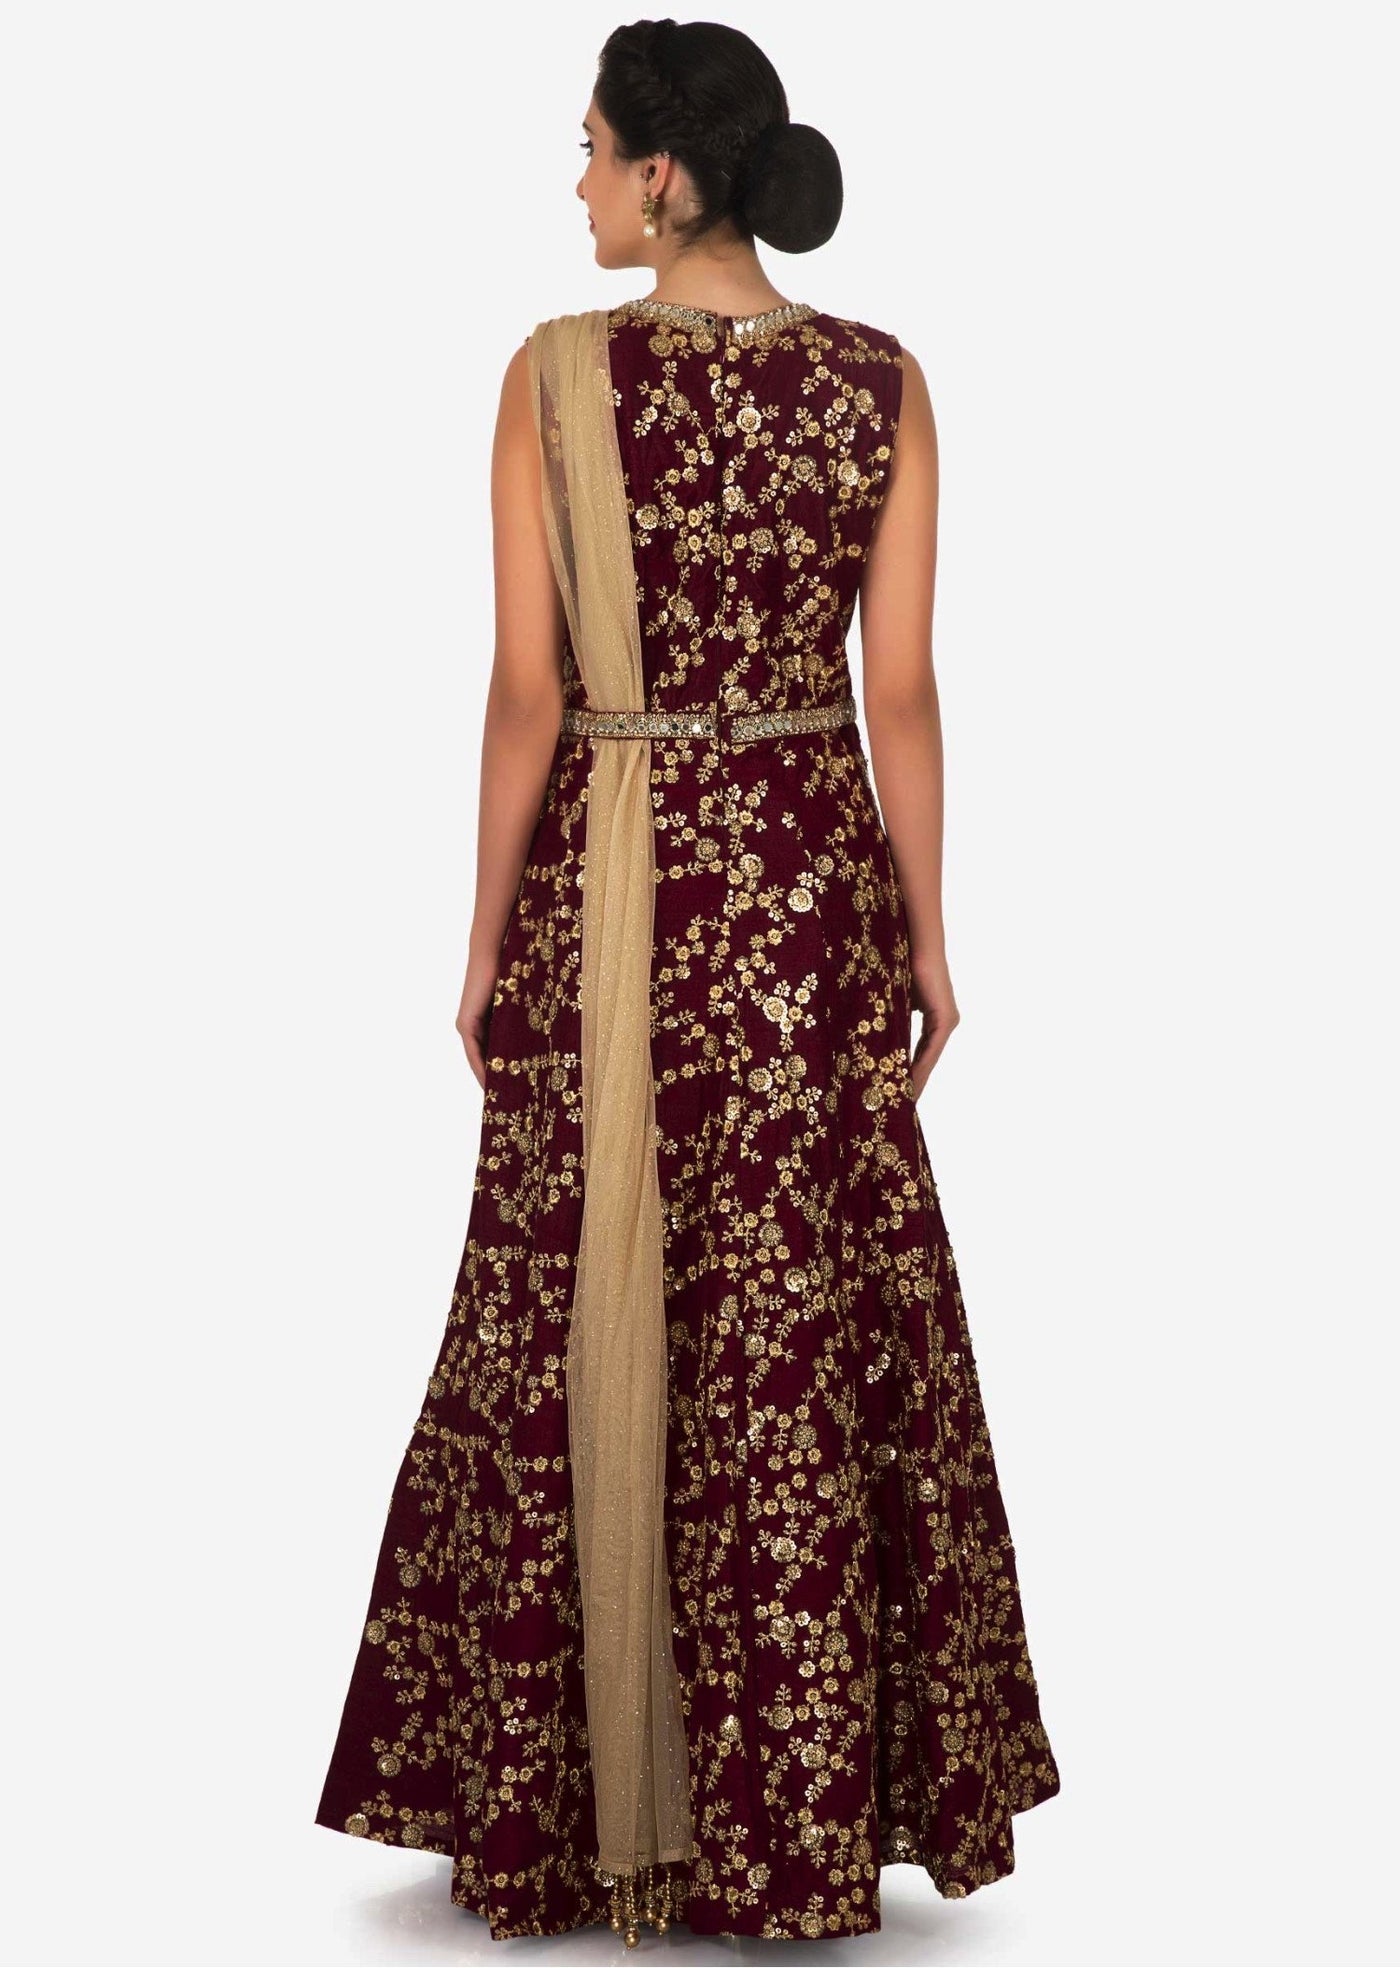 Deep maroon suit - Indian Clothing in Denver, CO, Aurora, CO, Boulder, CO, Fort Collins, CO, Colorado Springs, CO, Parker, CO, Highlands Ranch, CO, Cherry Creek, CO, Centennial, CO, and Longmont, CO. Nationwide shipping USA - India Fashion X